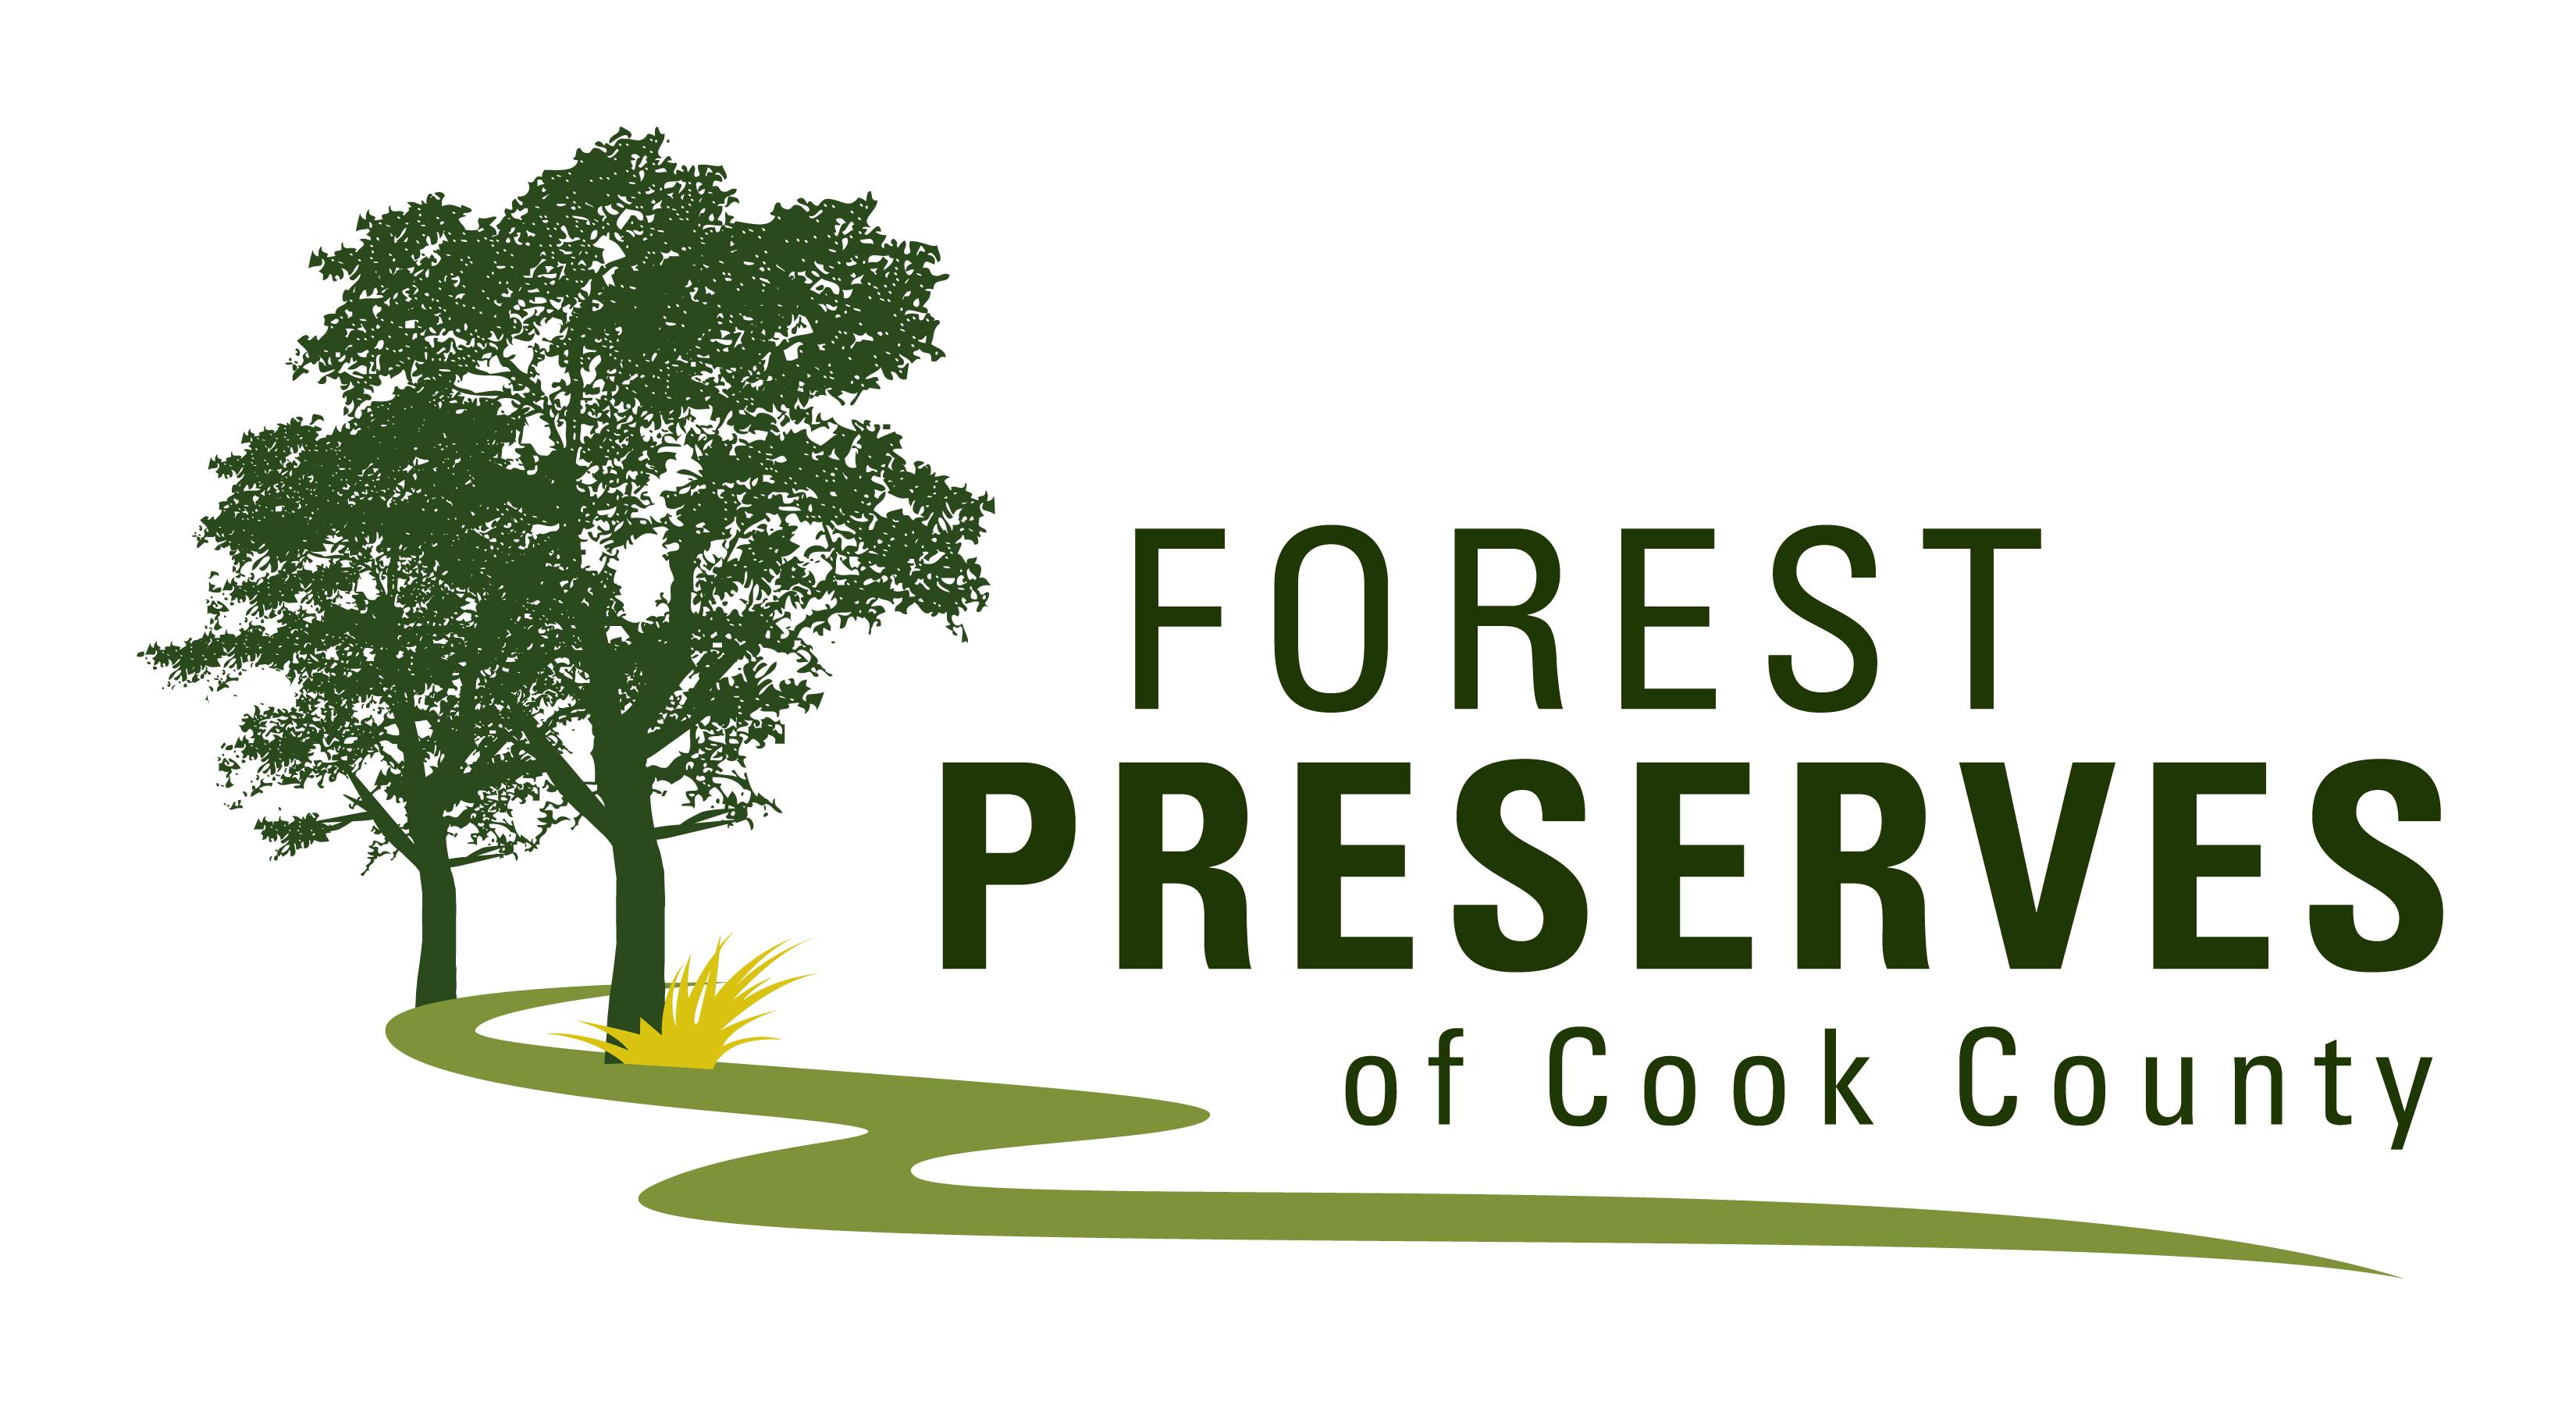 The Forest Preserve District of Cook County